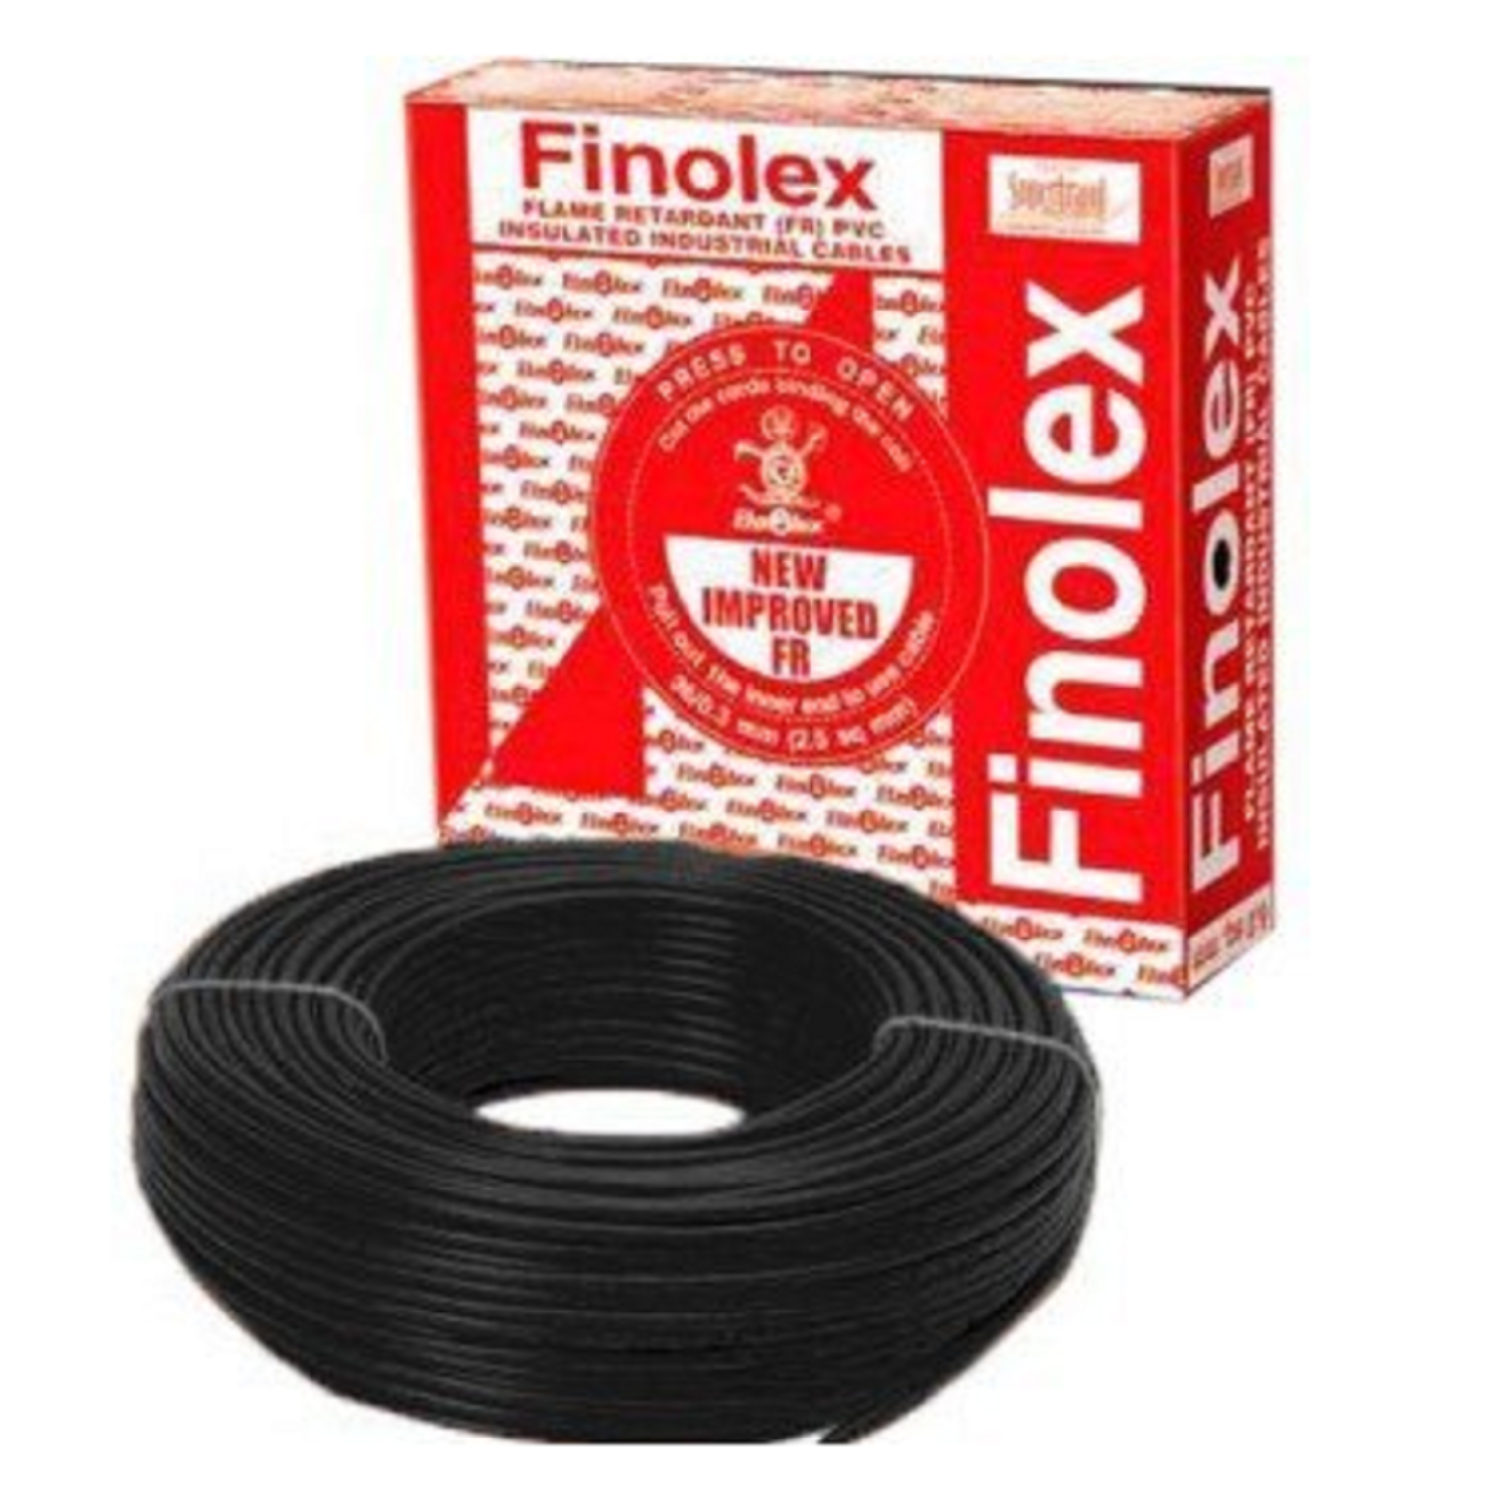 1.0 Sqmm Finolex FR Single Core Copper Wire 90 MTR With PVC Insulated for House 38 Industrial (Black